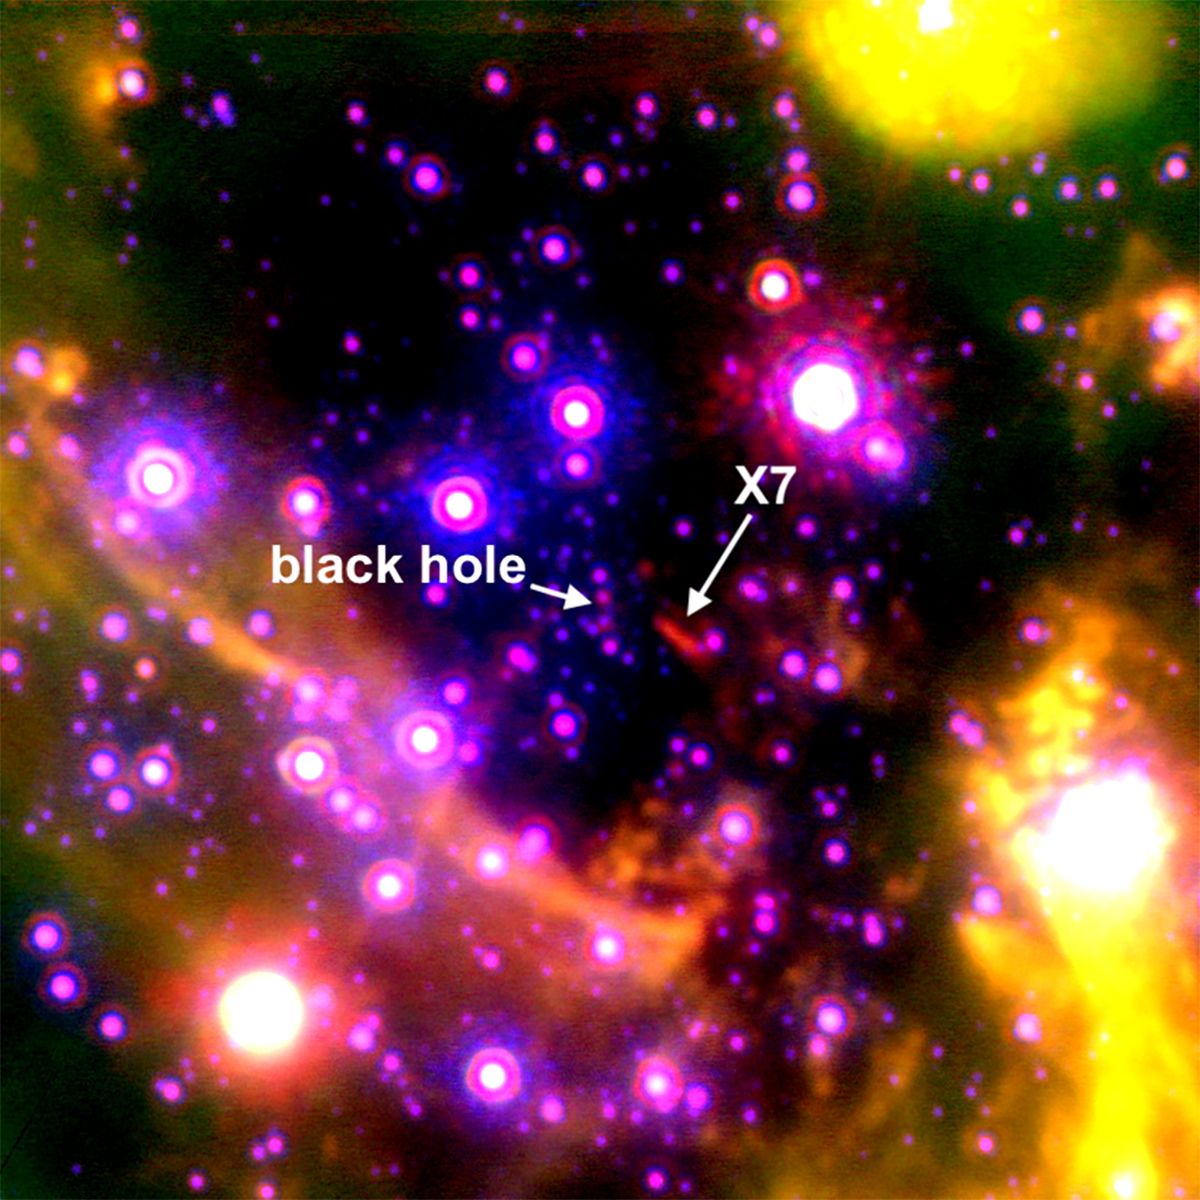 X7 location relative to the Milky Way's supermassive black hole